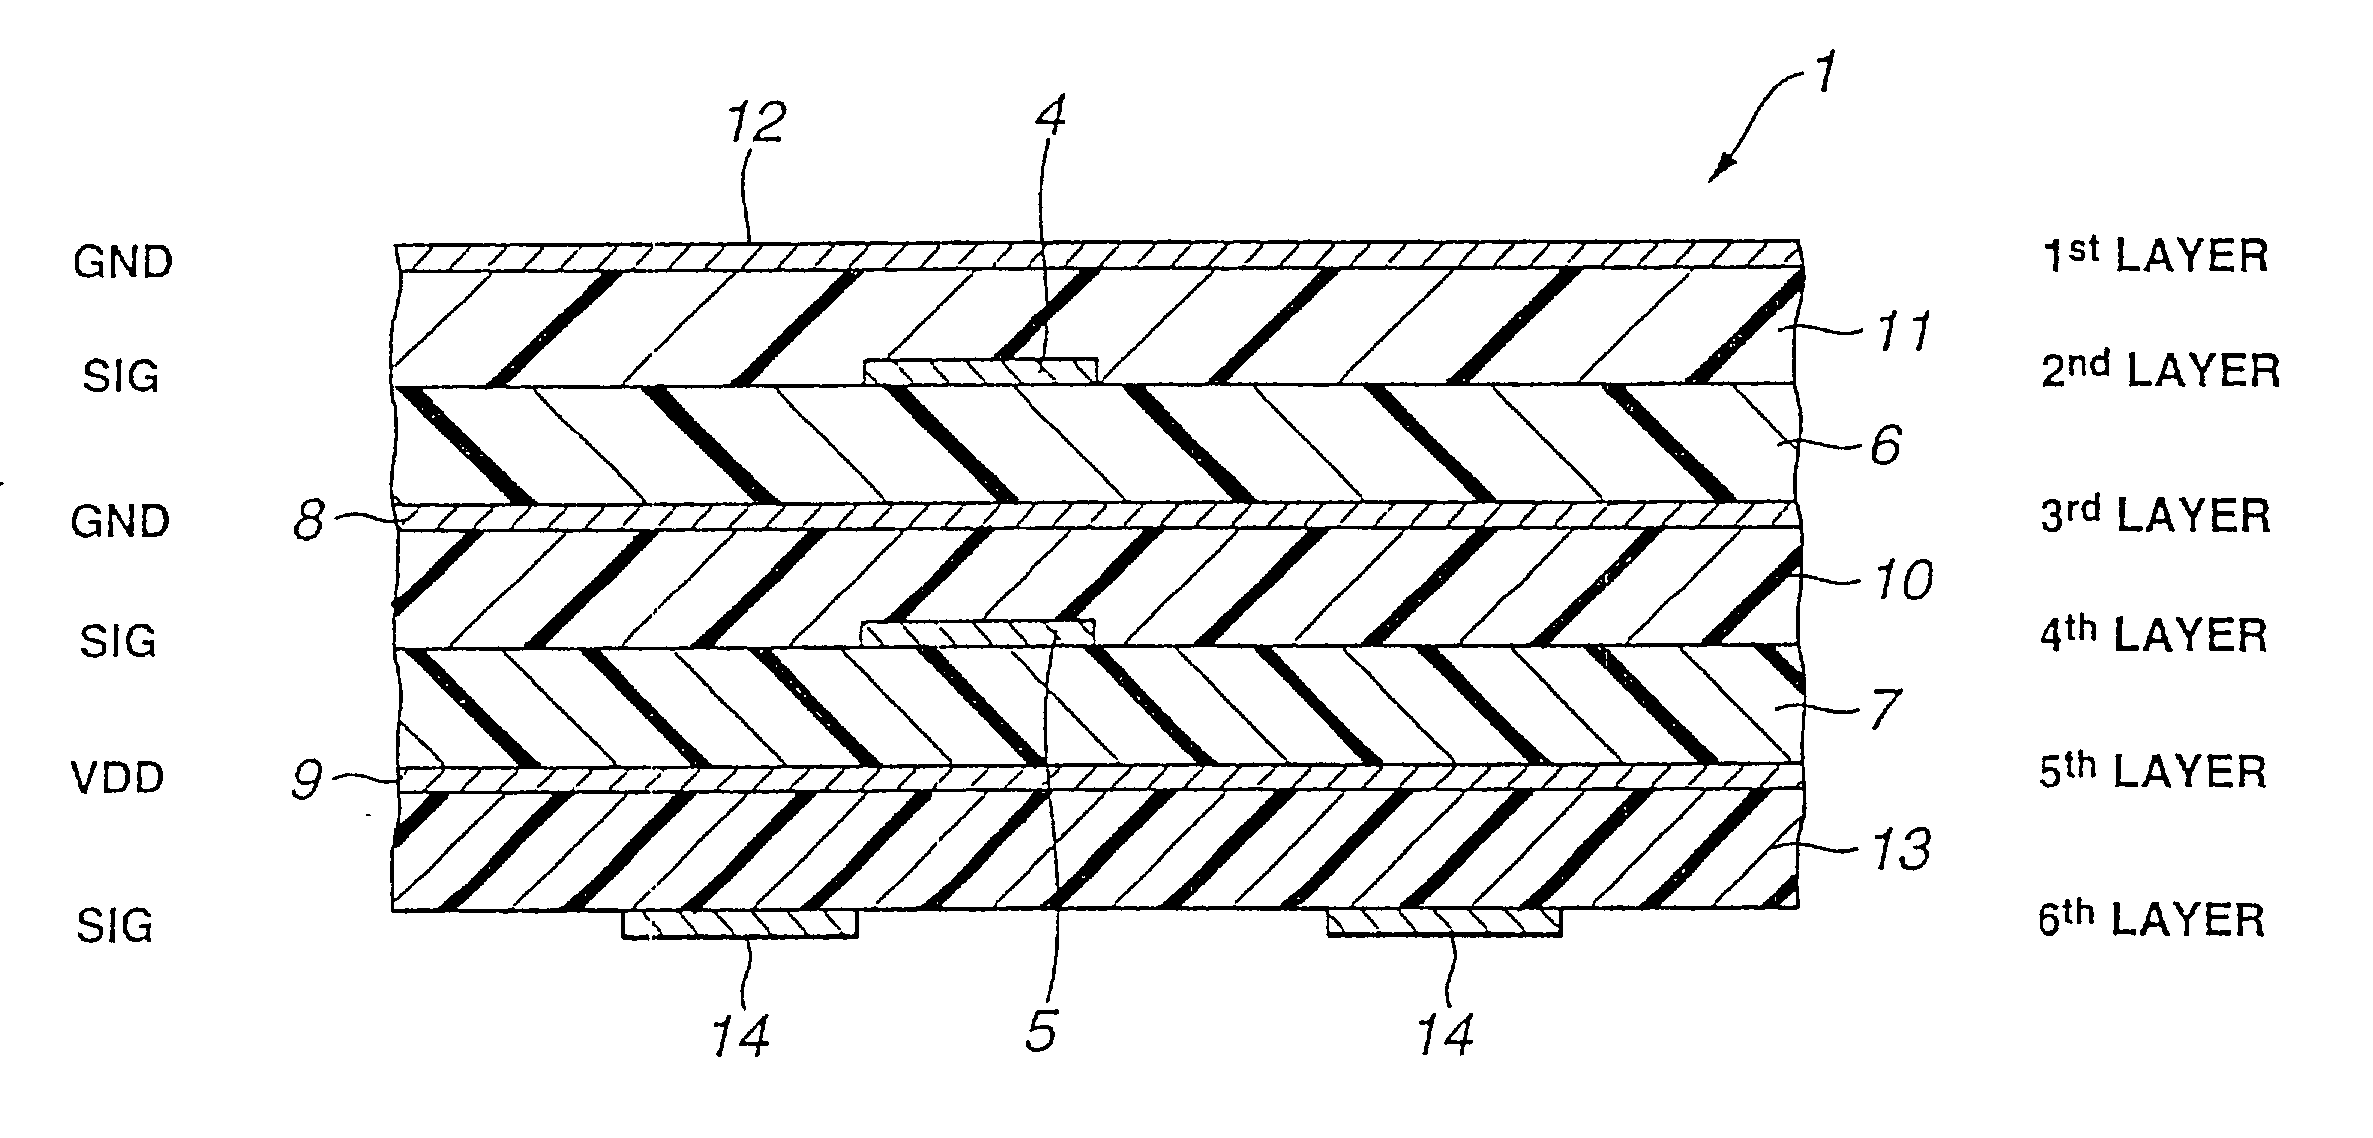 Multilayer type printed-wiring board and method of measuring impedance of multilayer type printed-wiring board